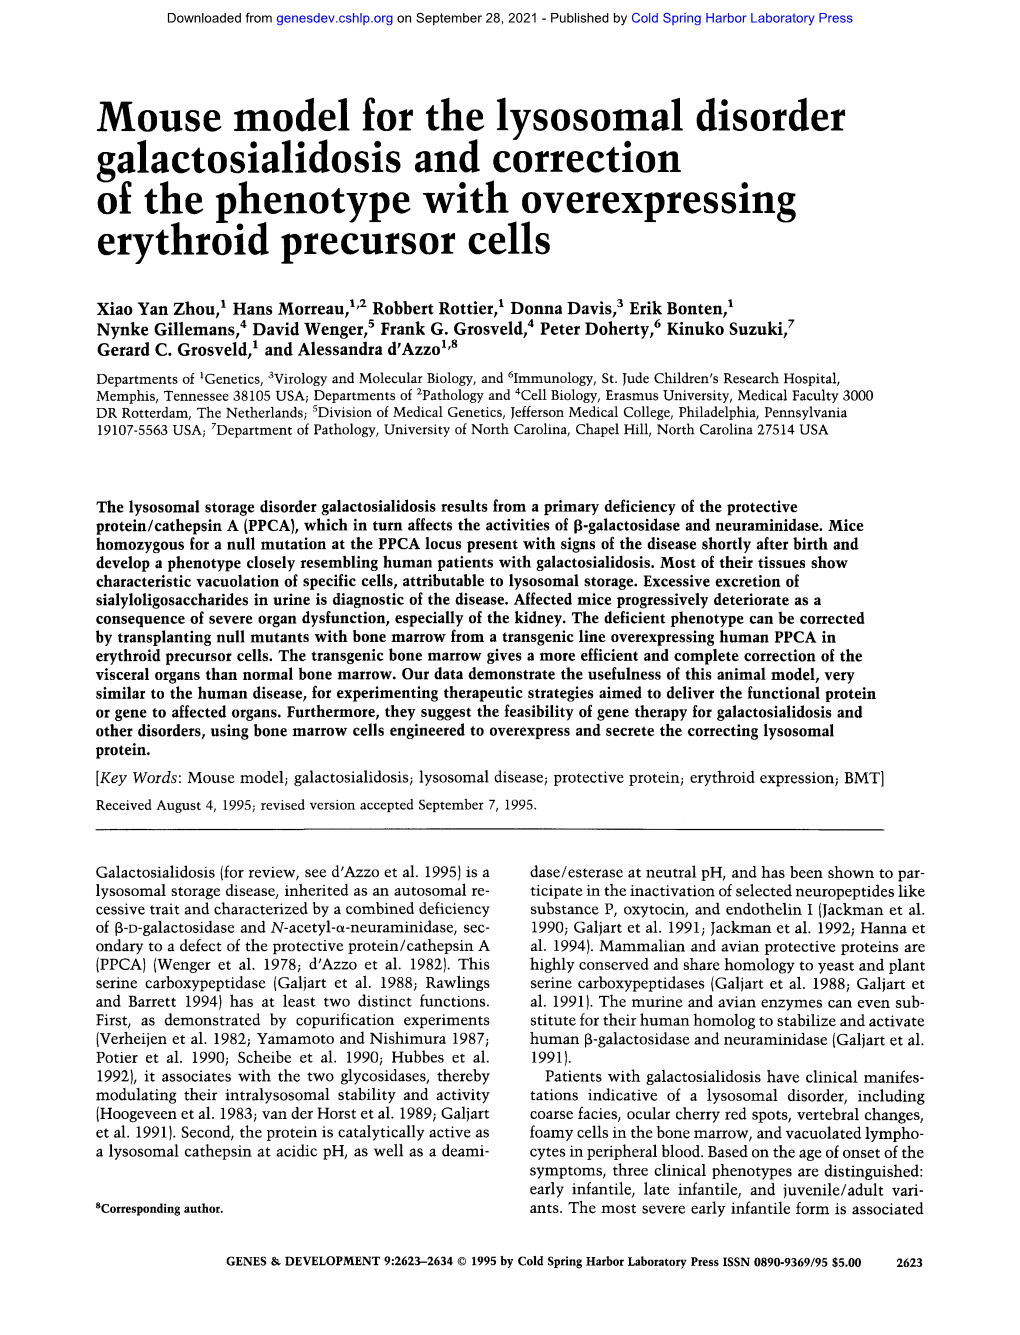 Mouse Model for the Lysosomal Disorder Galactosialidosis and Correction of the Phenotype with Overexpressing Erythroid Precursor Cells